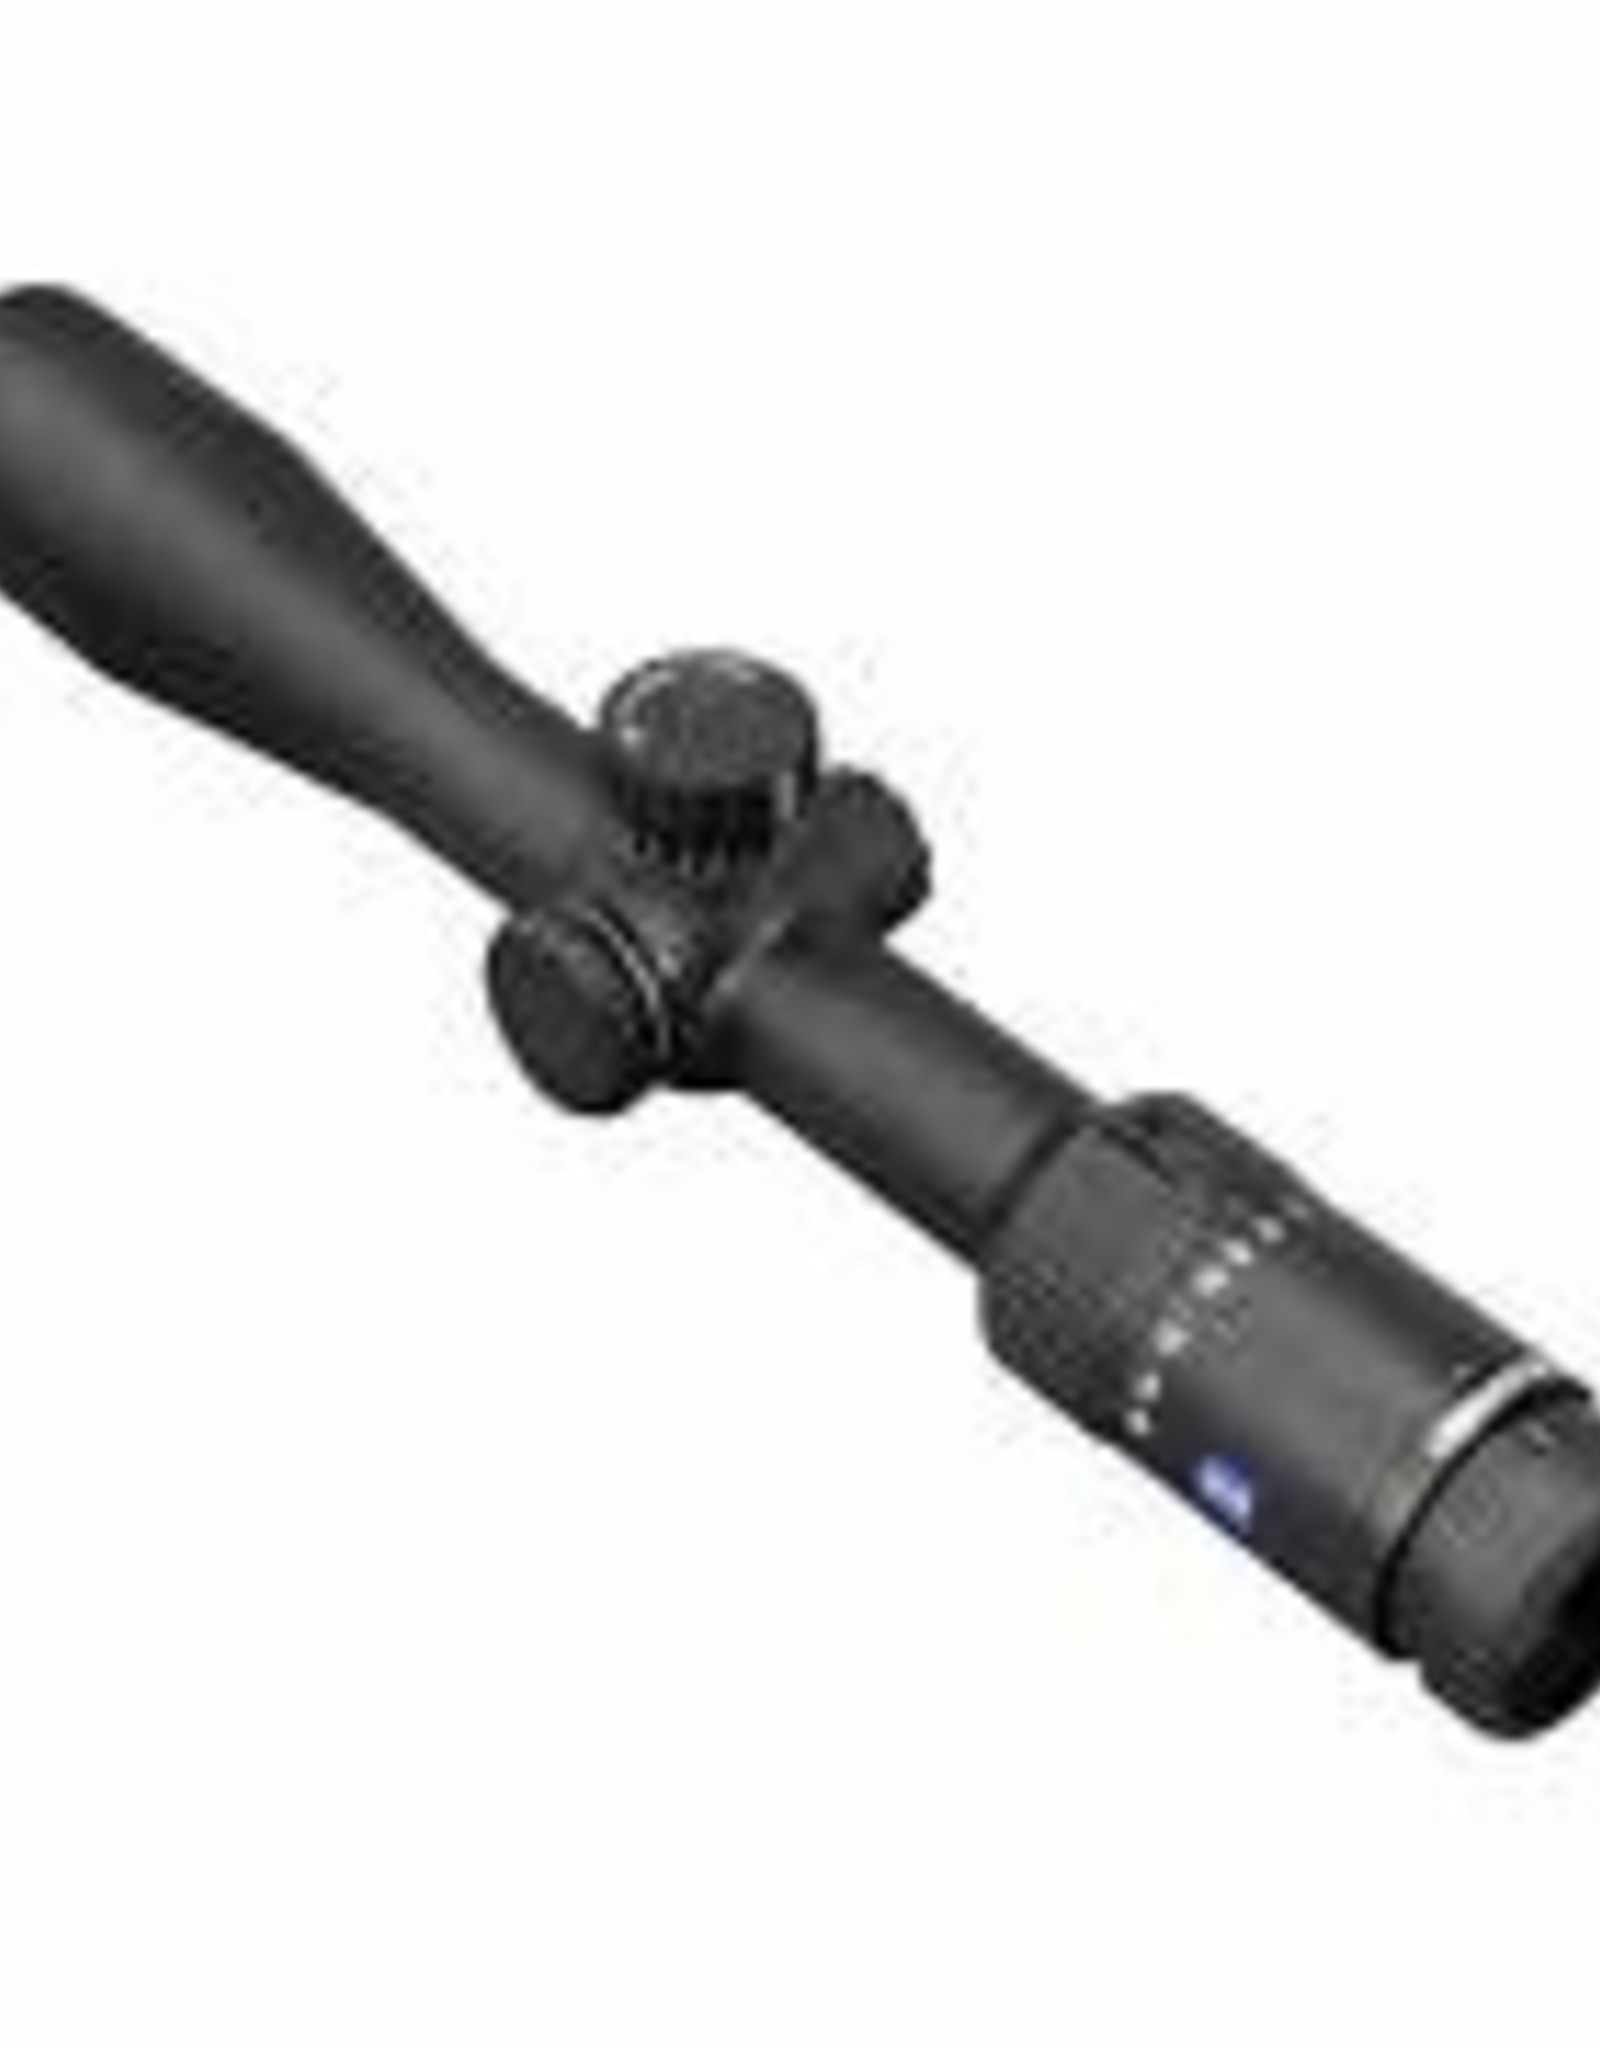 Zeiss Conquest V4 6-24x50 Reticle #68 Illuminated